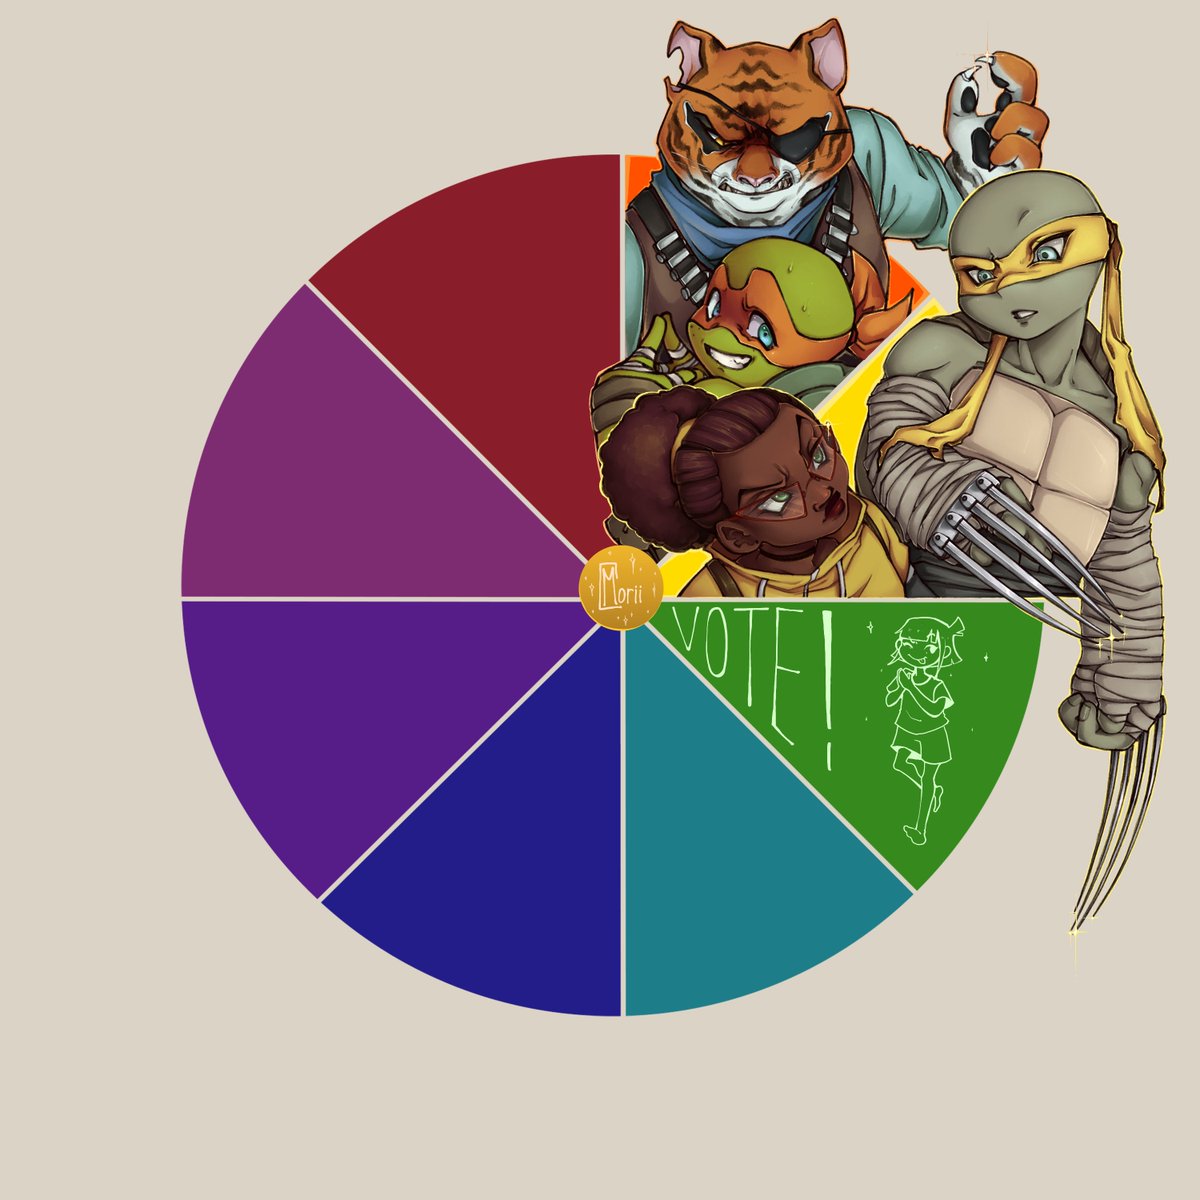 TMNT colour wheel challenge yellow edition!!! We got april and jennika, suggest green characters :D (please someone say casey jr)

#TMNT #rottmnt #tmntjennika #idwtmnt #rottmntfanart #rottmntart #tmntfanart #rottmntapril #SaveROTTMNT #UnpauseROTTMNT #colourwheelchallenge